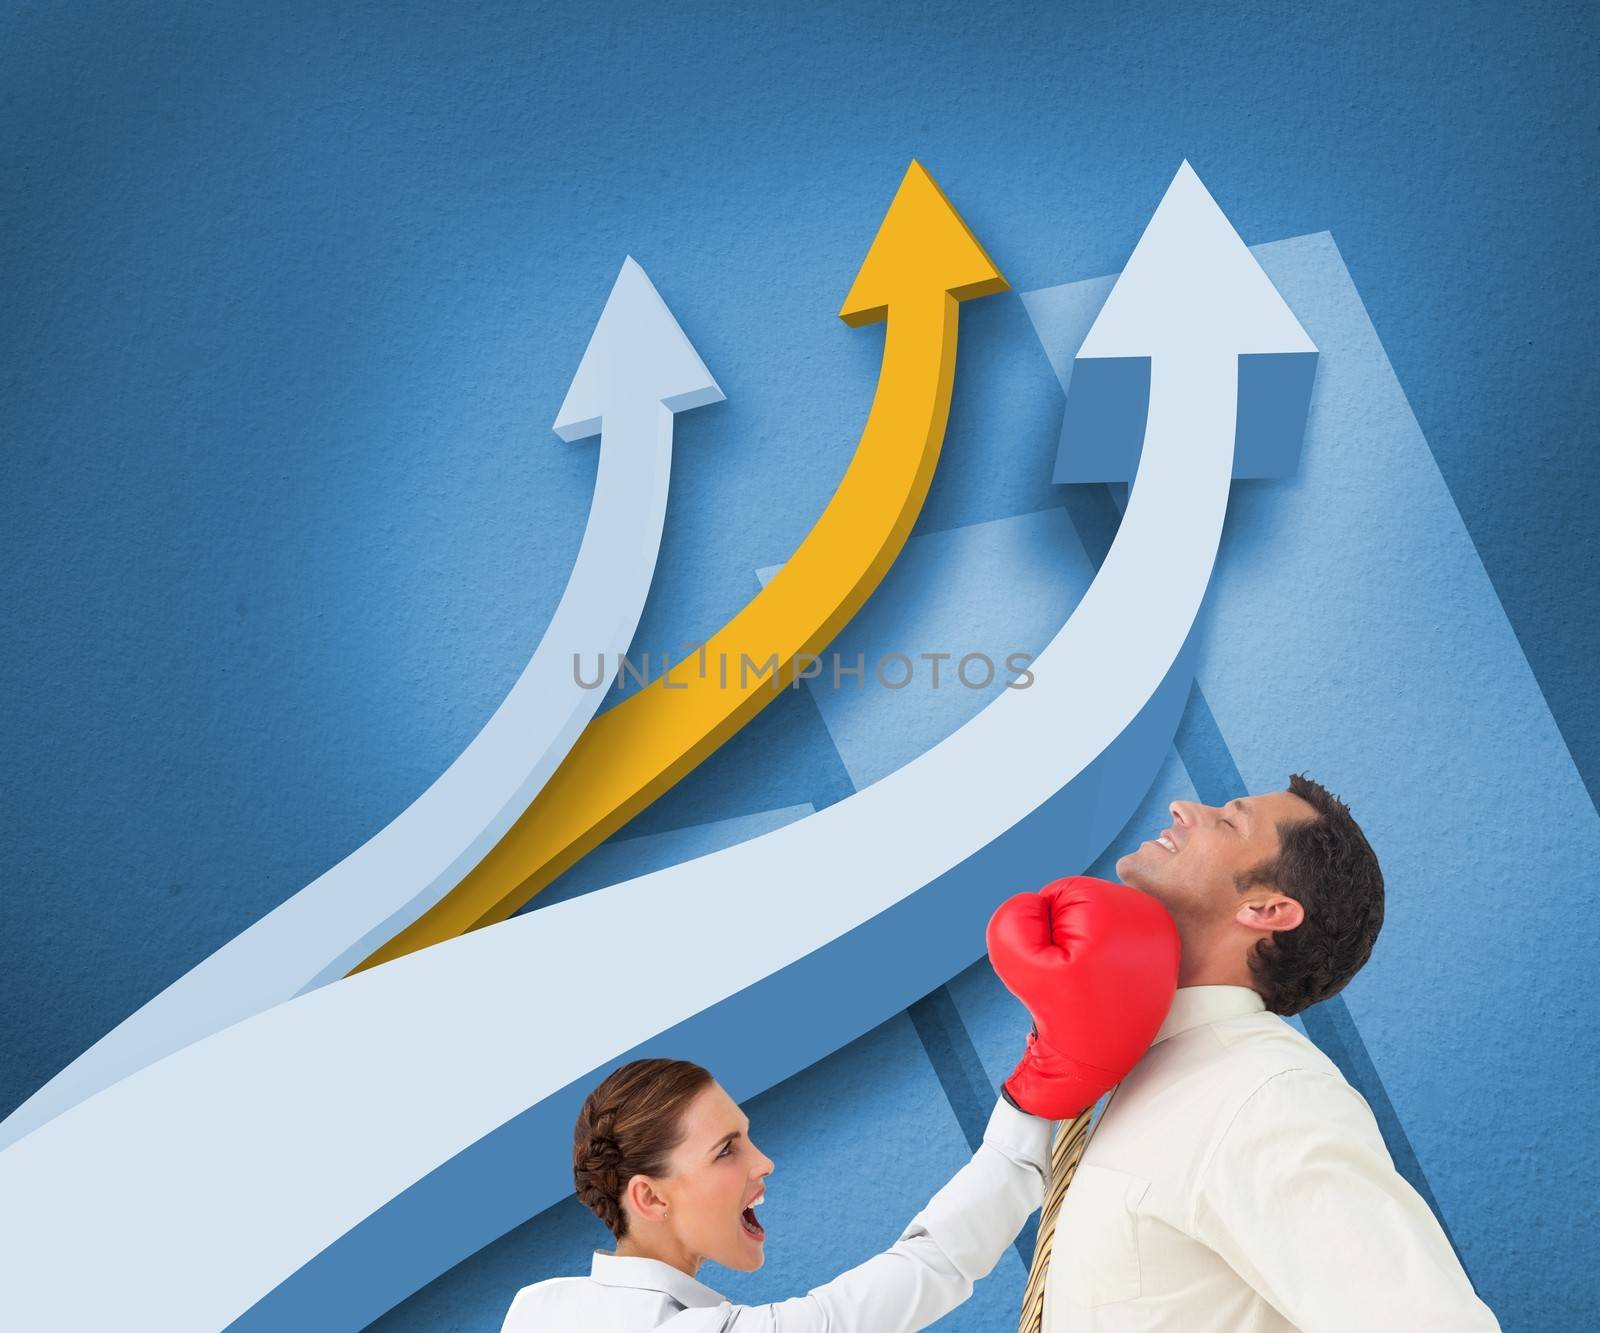 Composite image of businesswoman hitting a businessman with boxing gloves in front of arrows on blue background